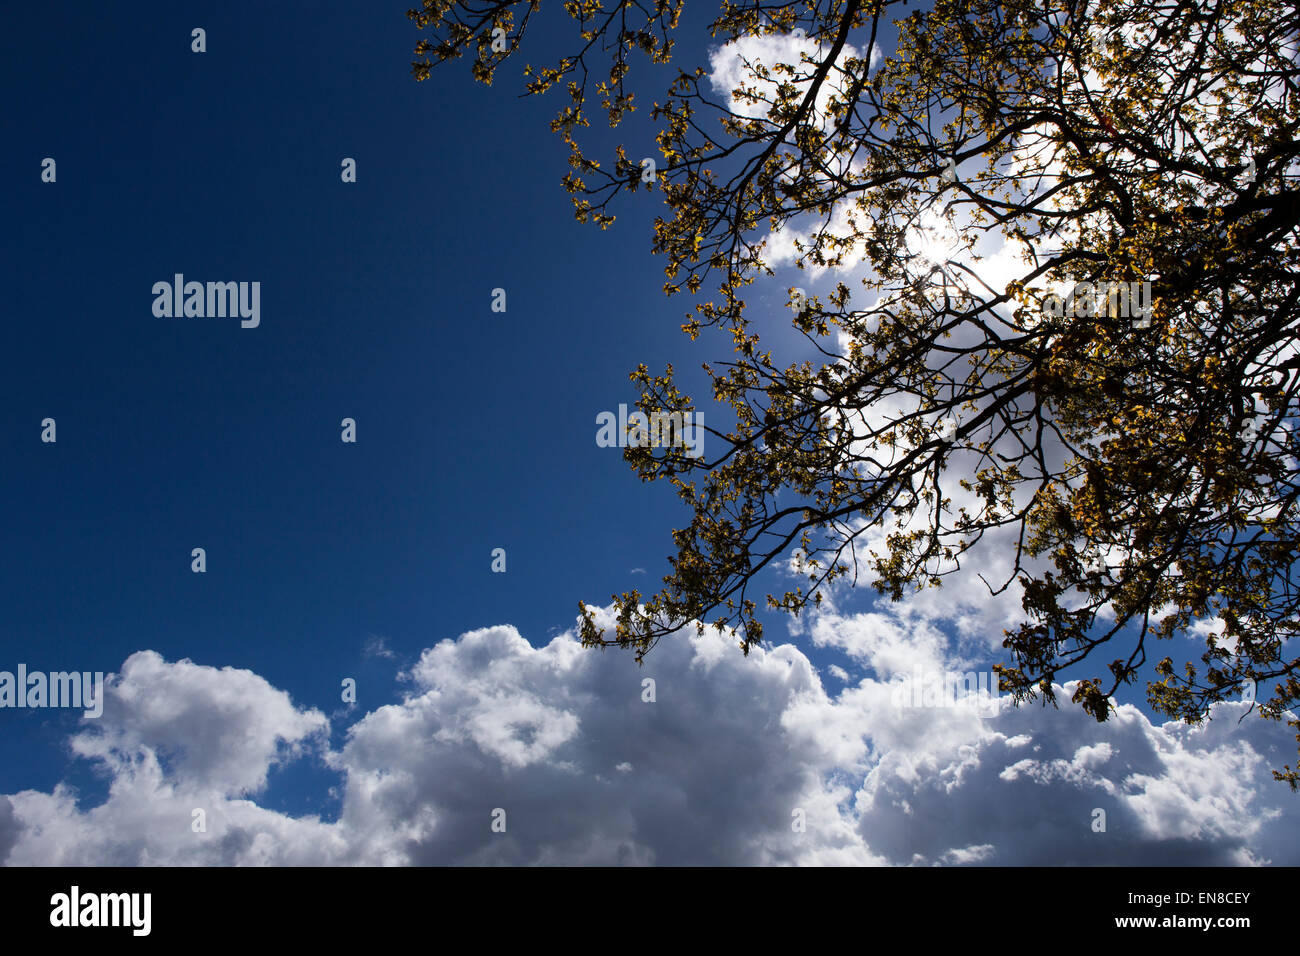 Branches of a tree against a blue cloudy sky Stock Photo